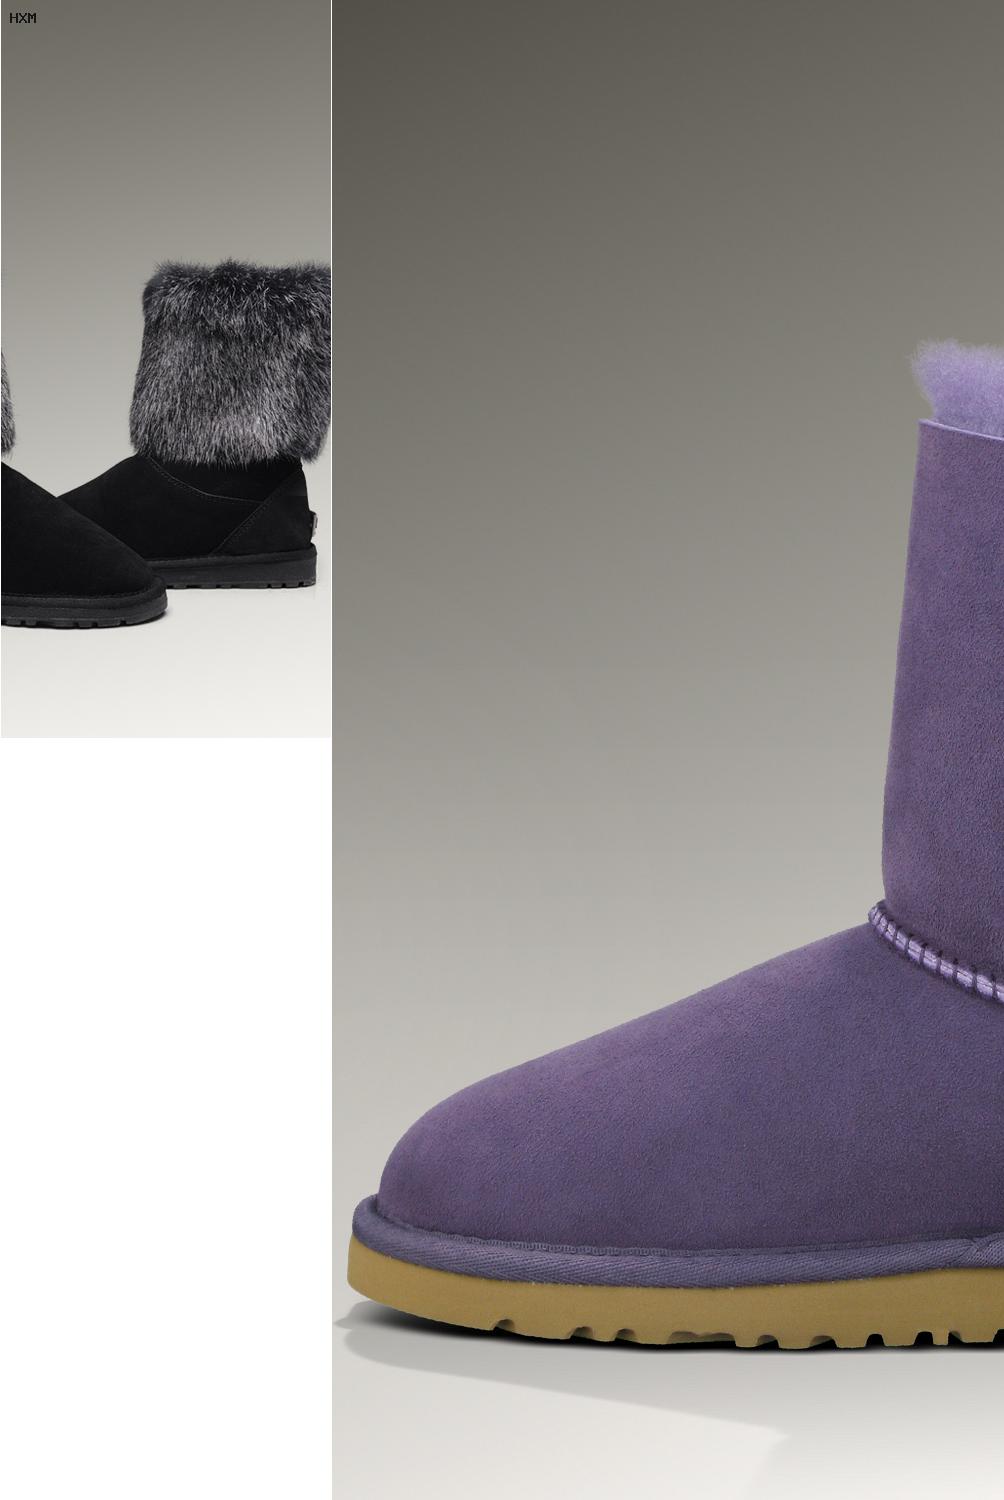 ugg boots price philippines